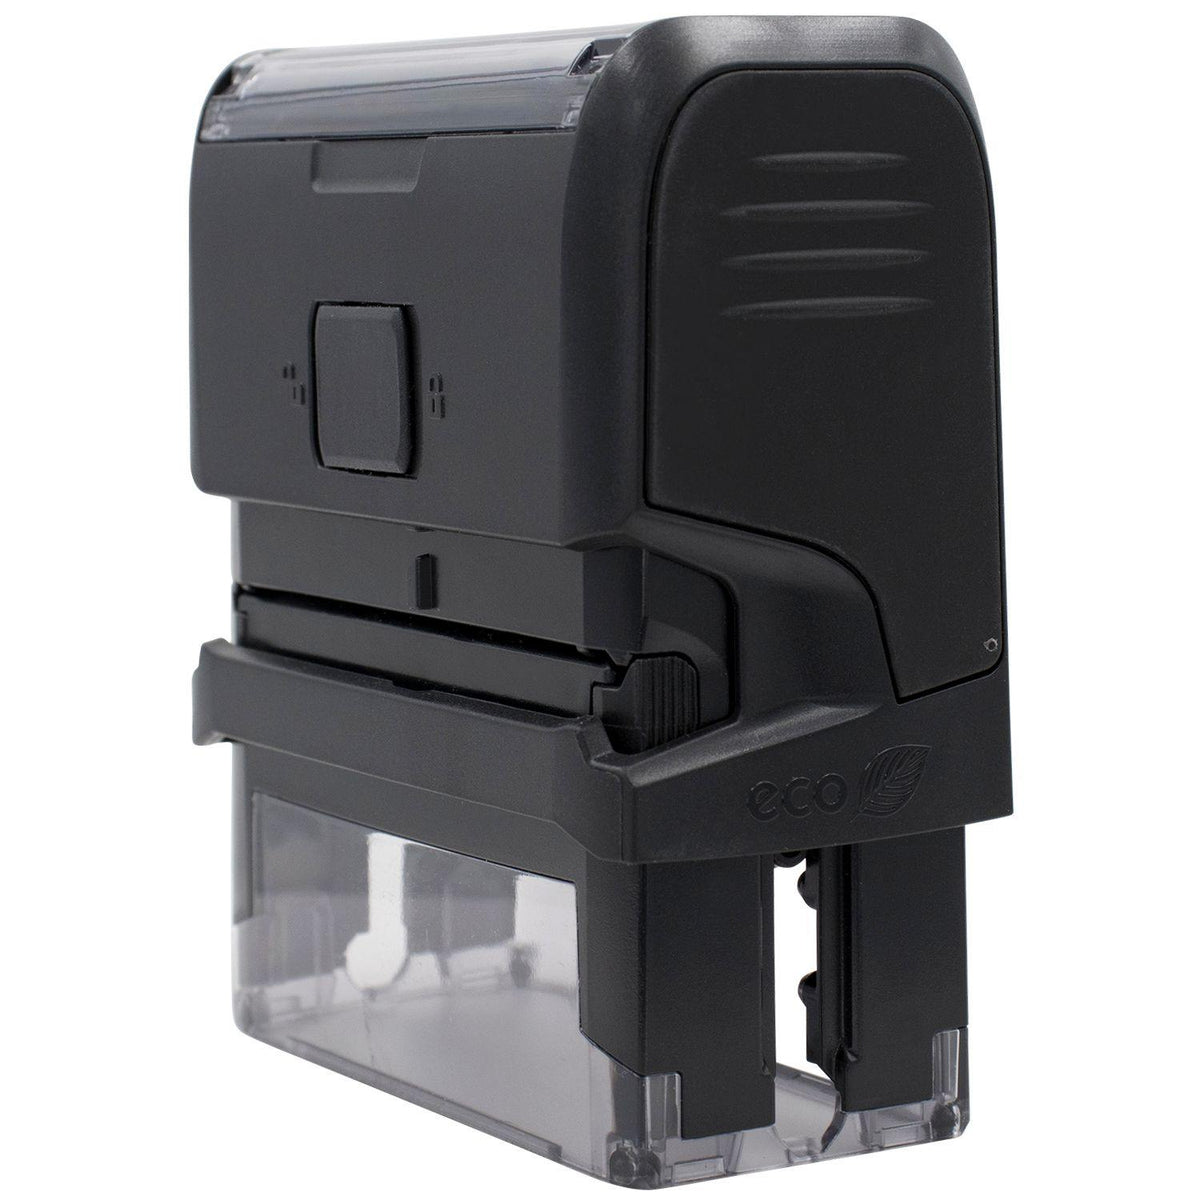 Self Inking Closed Stamp - Engineer Seal Stamps - Brand_Trodat, Impression Size_Small, Stamp Type_Self-Inking Stamp, Type of Use_Office